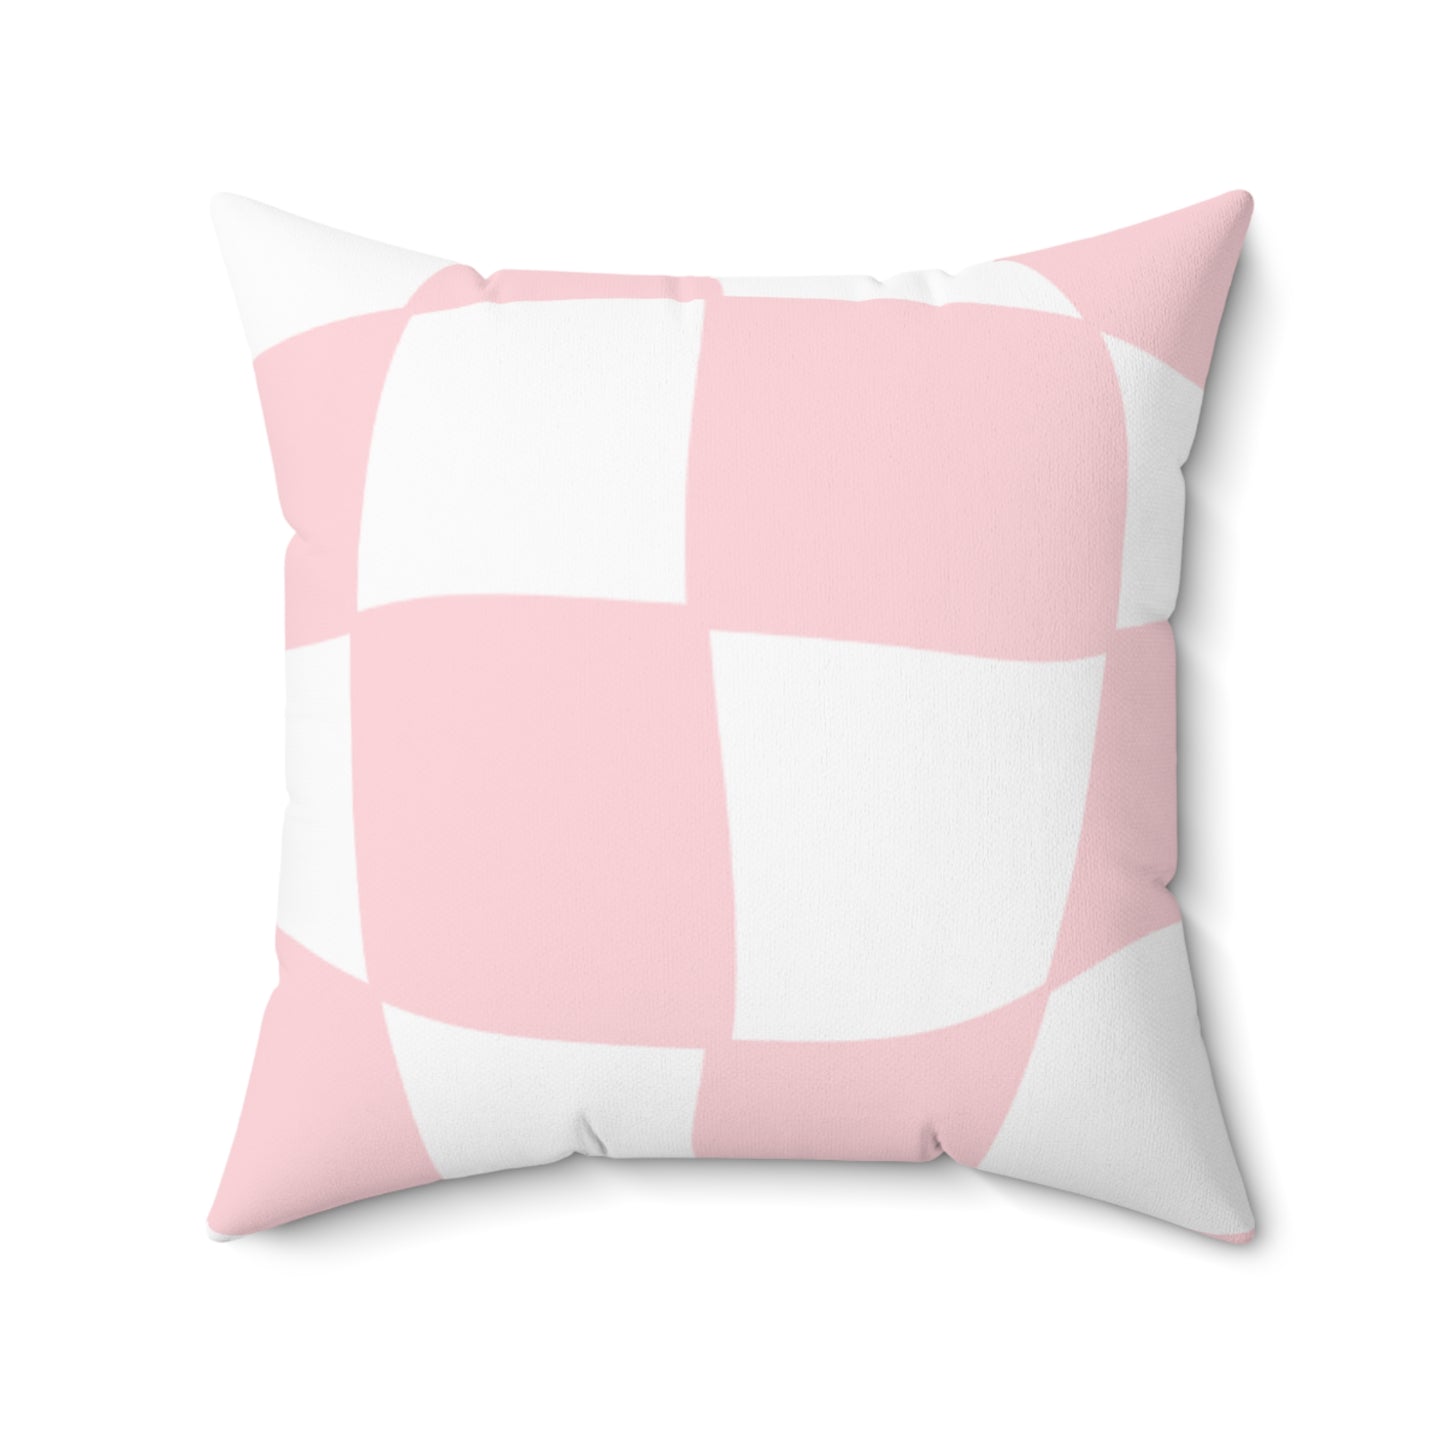 Hey Ya'll Pink & Purple Cowgirl Square Pillow Multiple Sizes